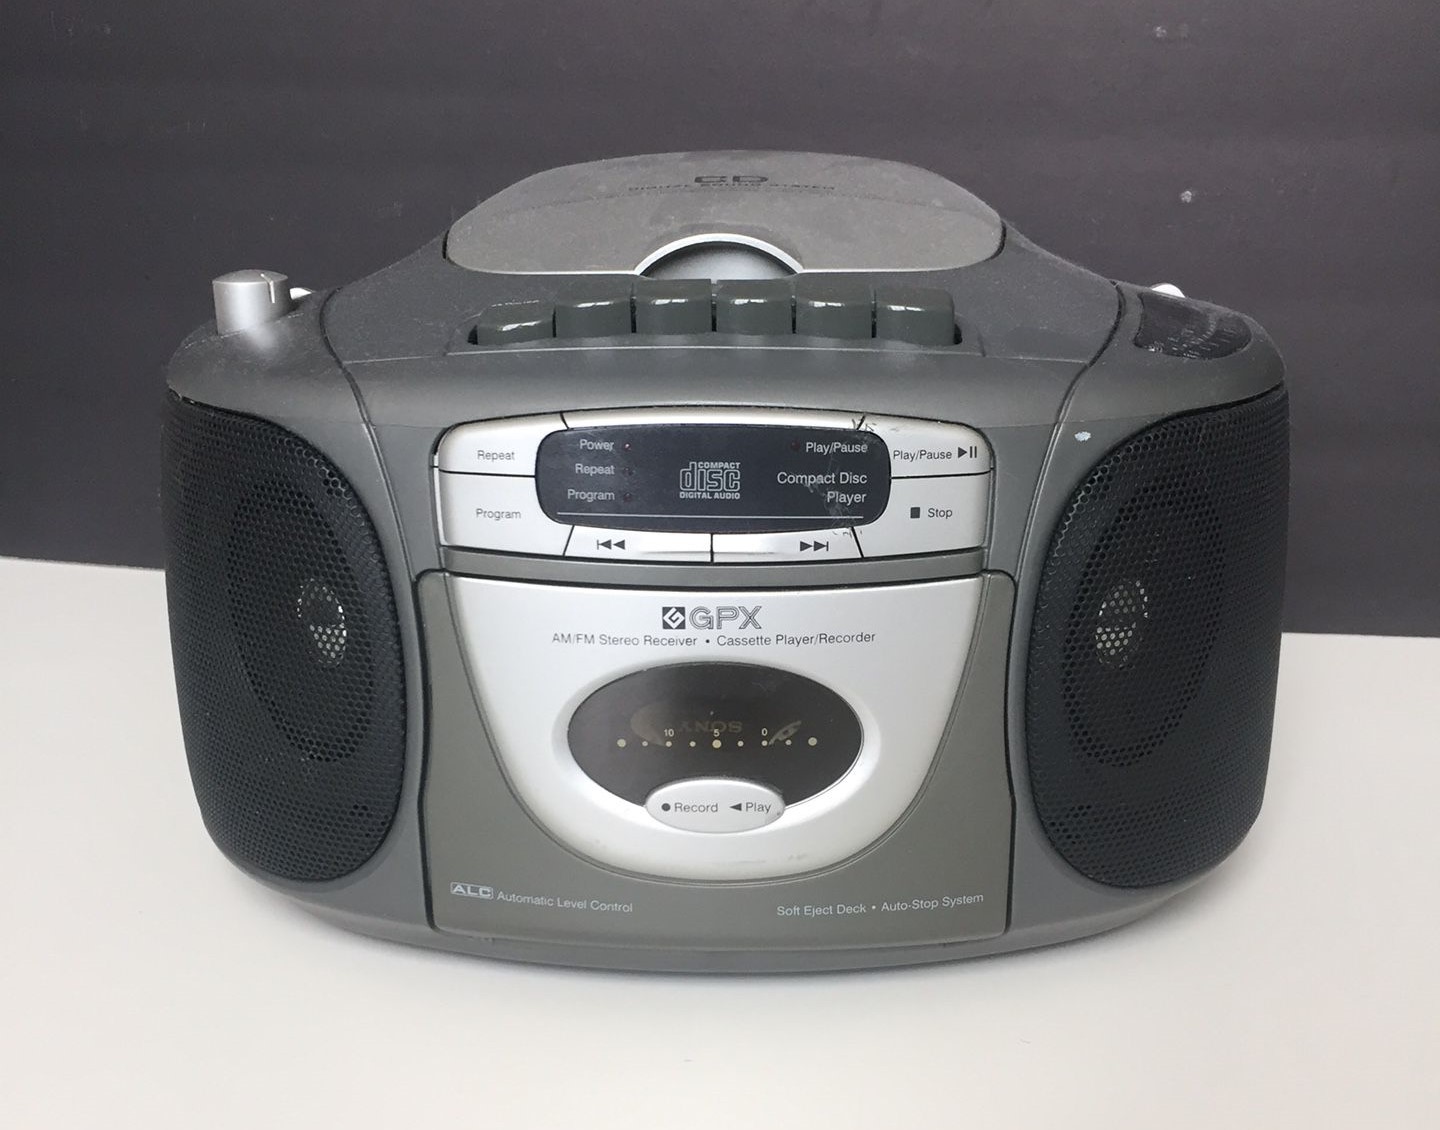 CD and Cassette Player Combo, Boombox CD Player Portable with AM/FM Radio,  Tape Recording, Stereo Sound, AC/DC Powered, AUX/Headphone Jack, Sleep